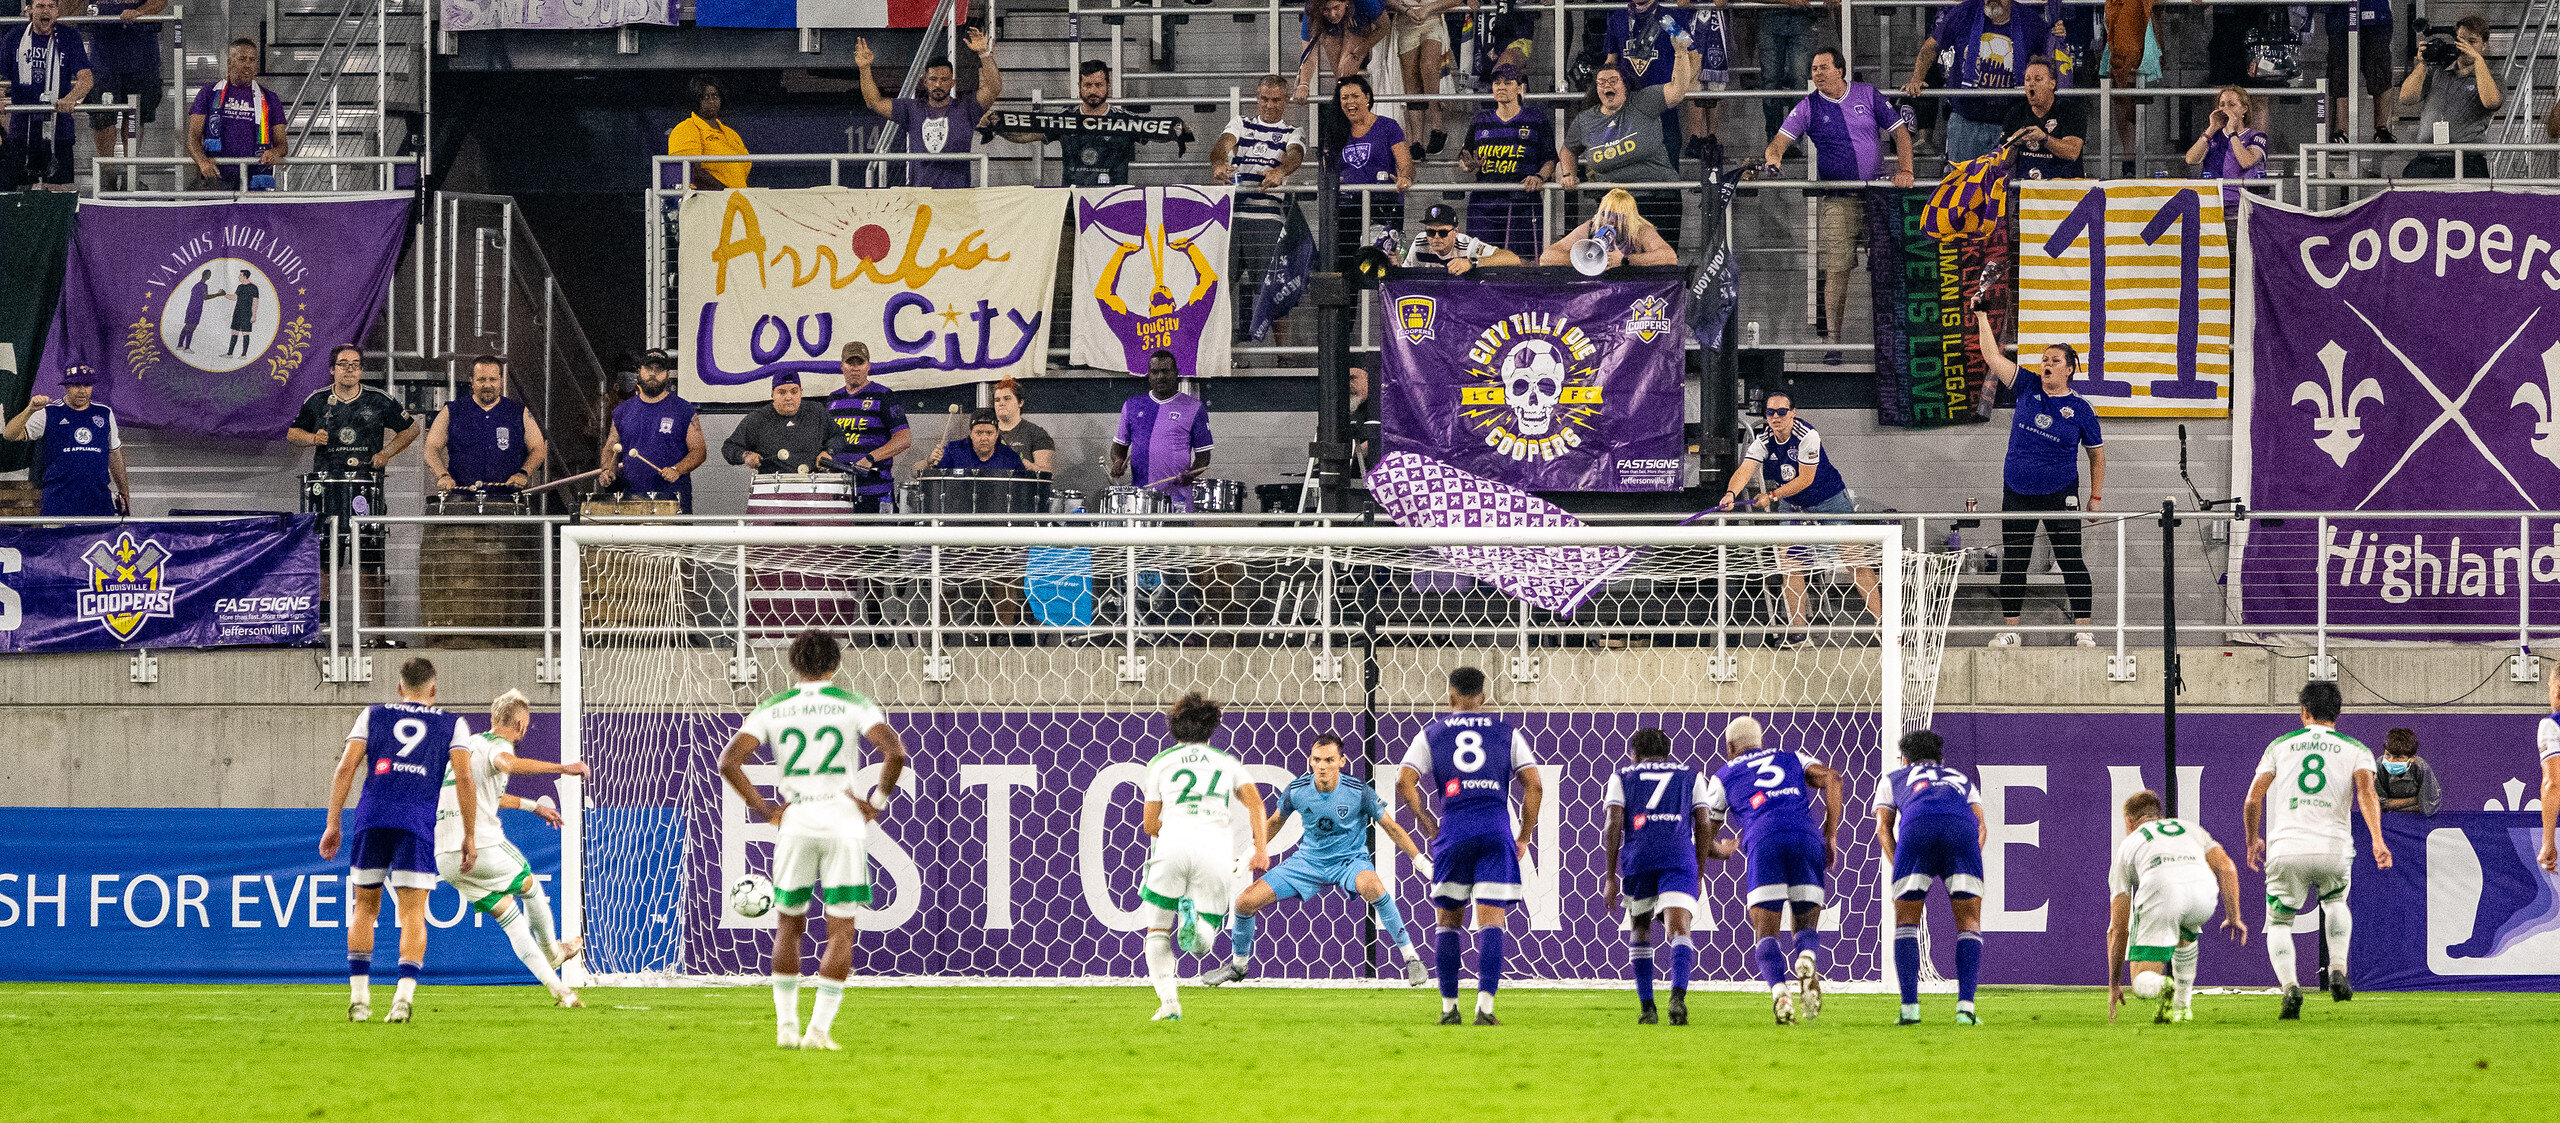 LouCity's O'Connor has earned his exit bows